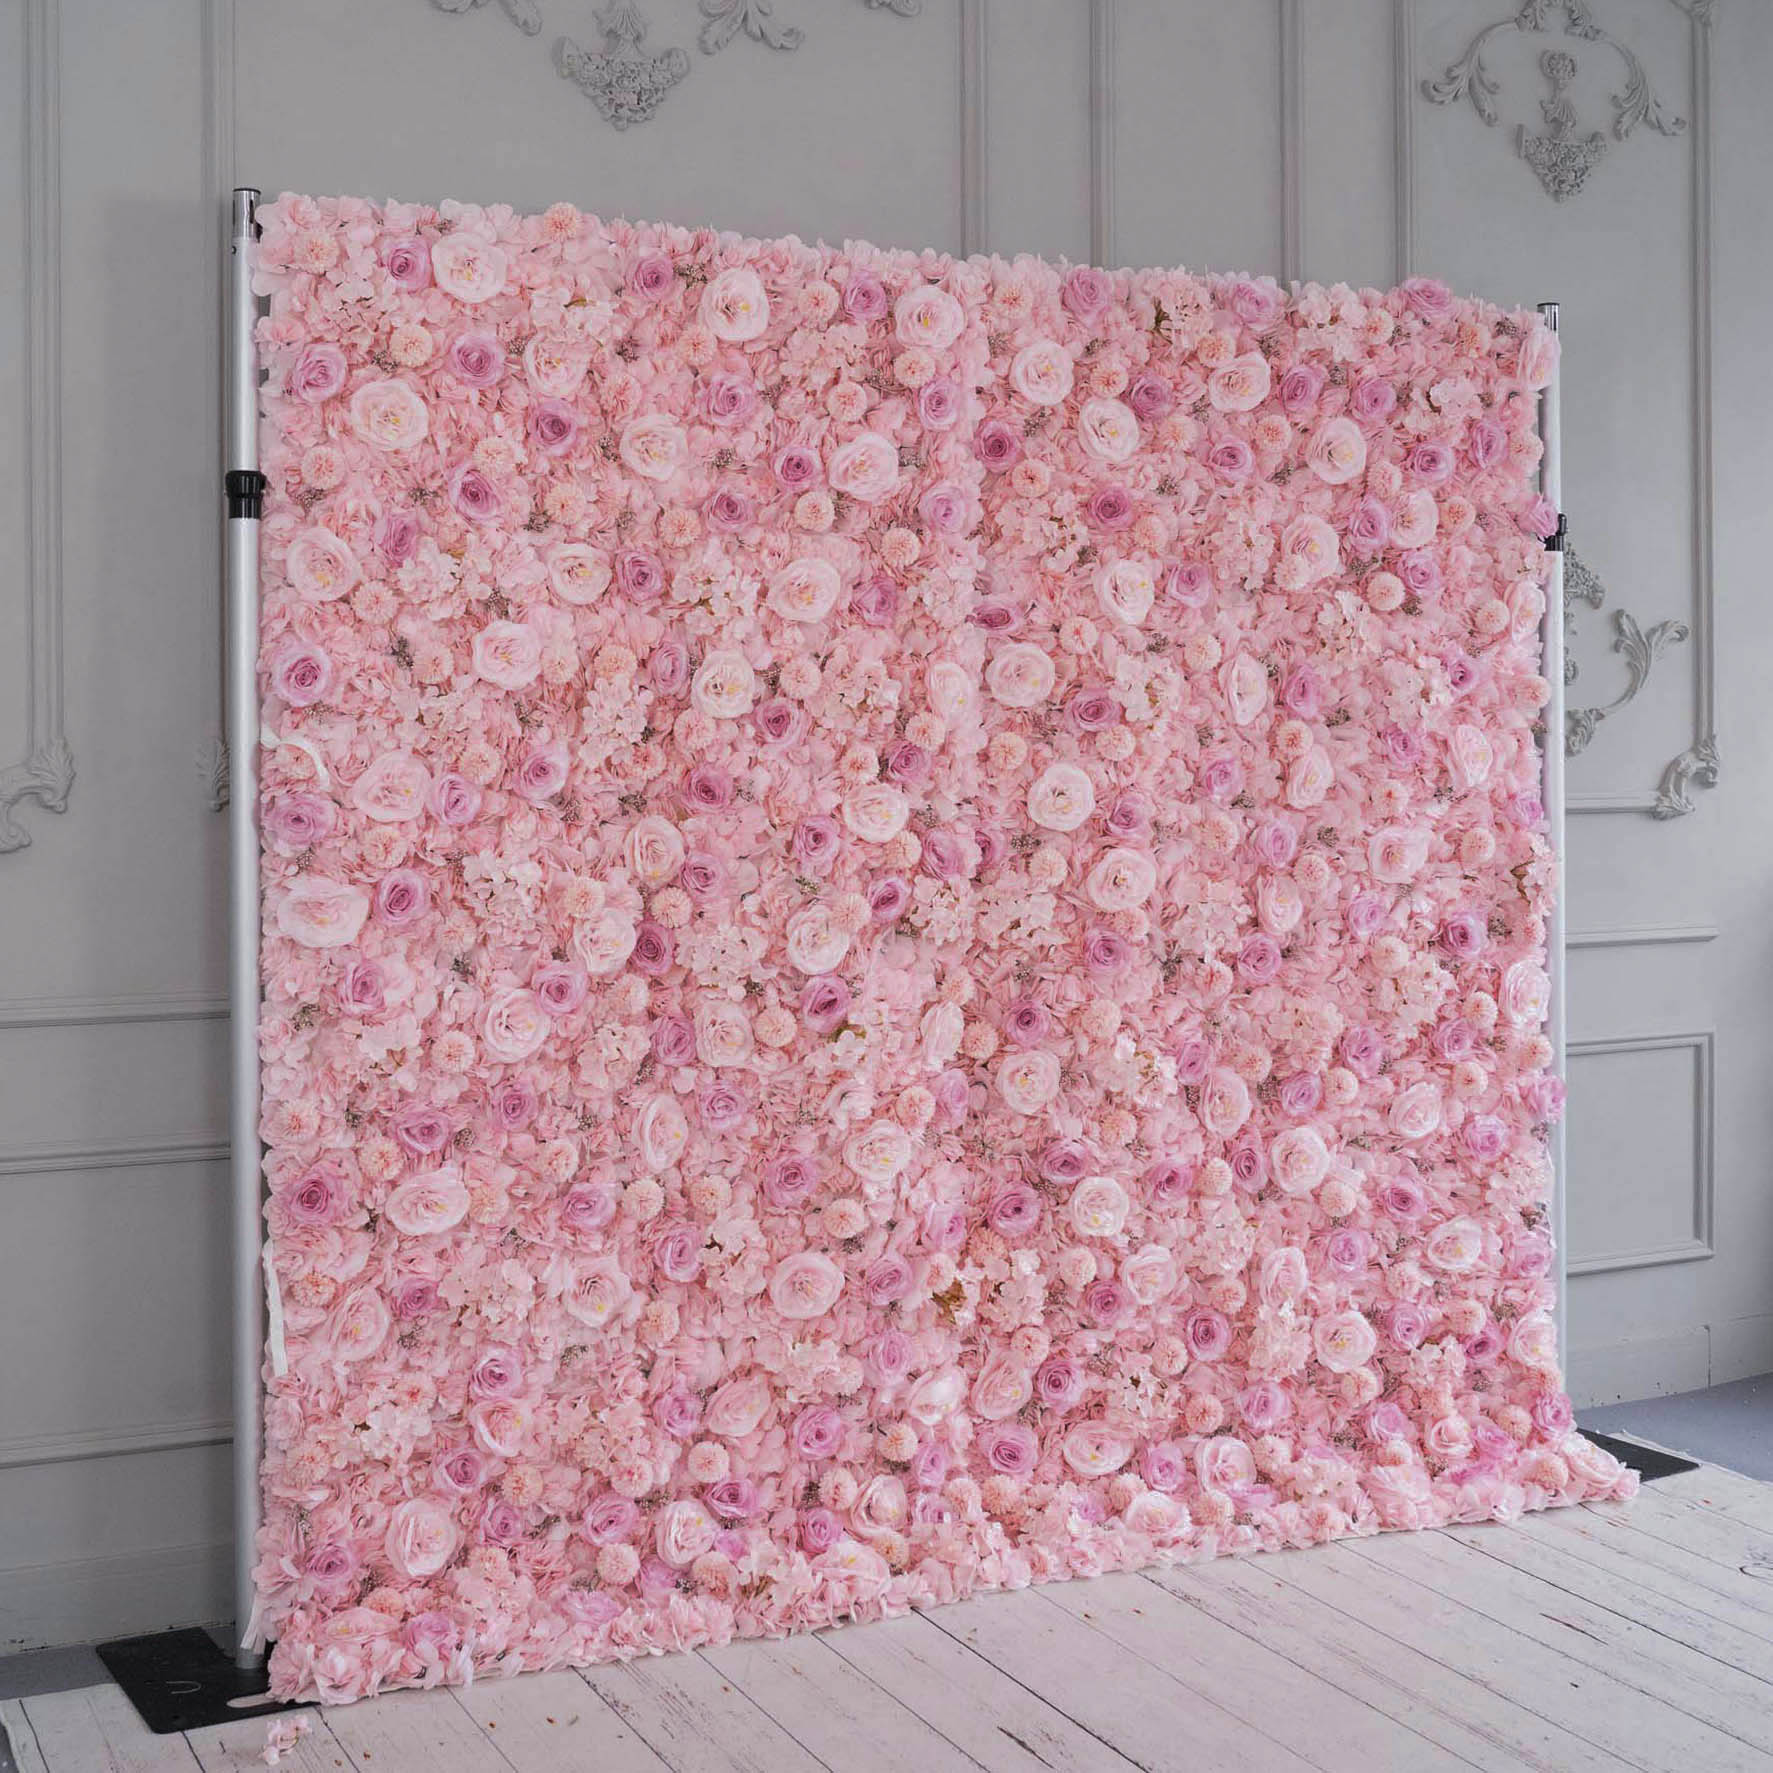 Flower Wall Baby Pink Rolling Up Curtain Floral Backdrop Wedding Party Proposal Decor